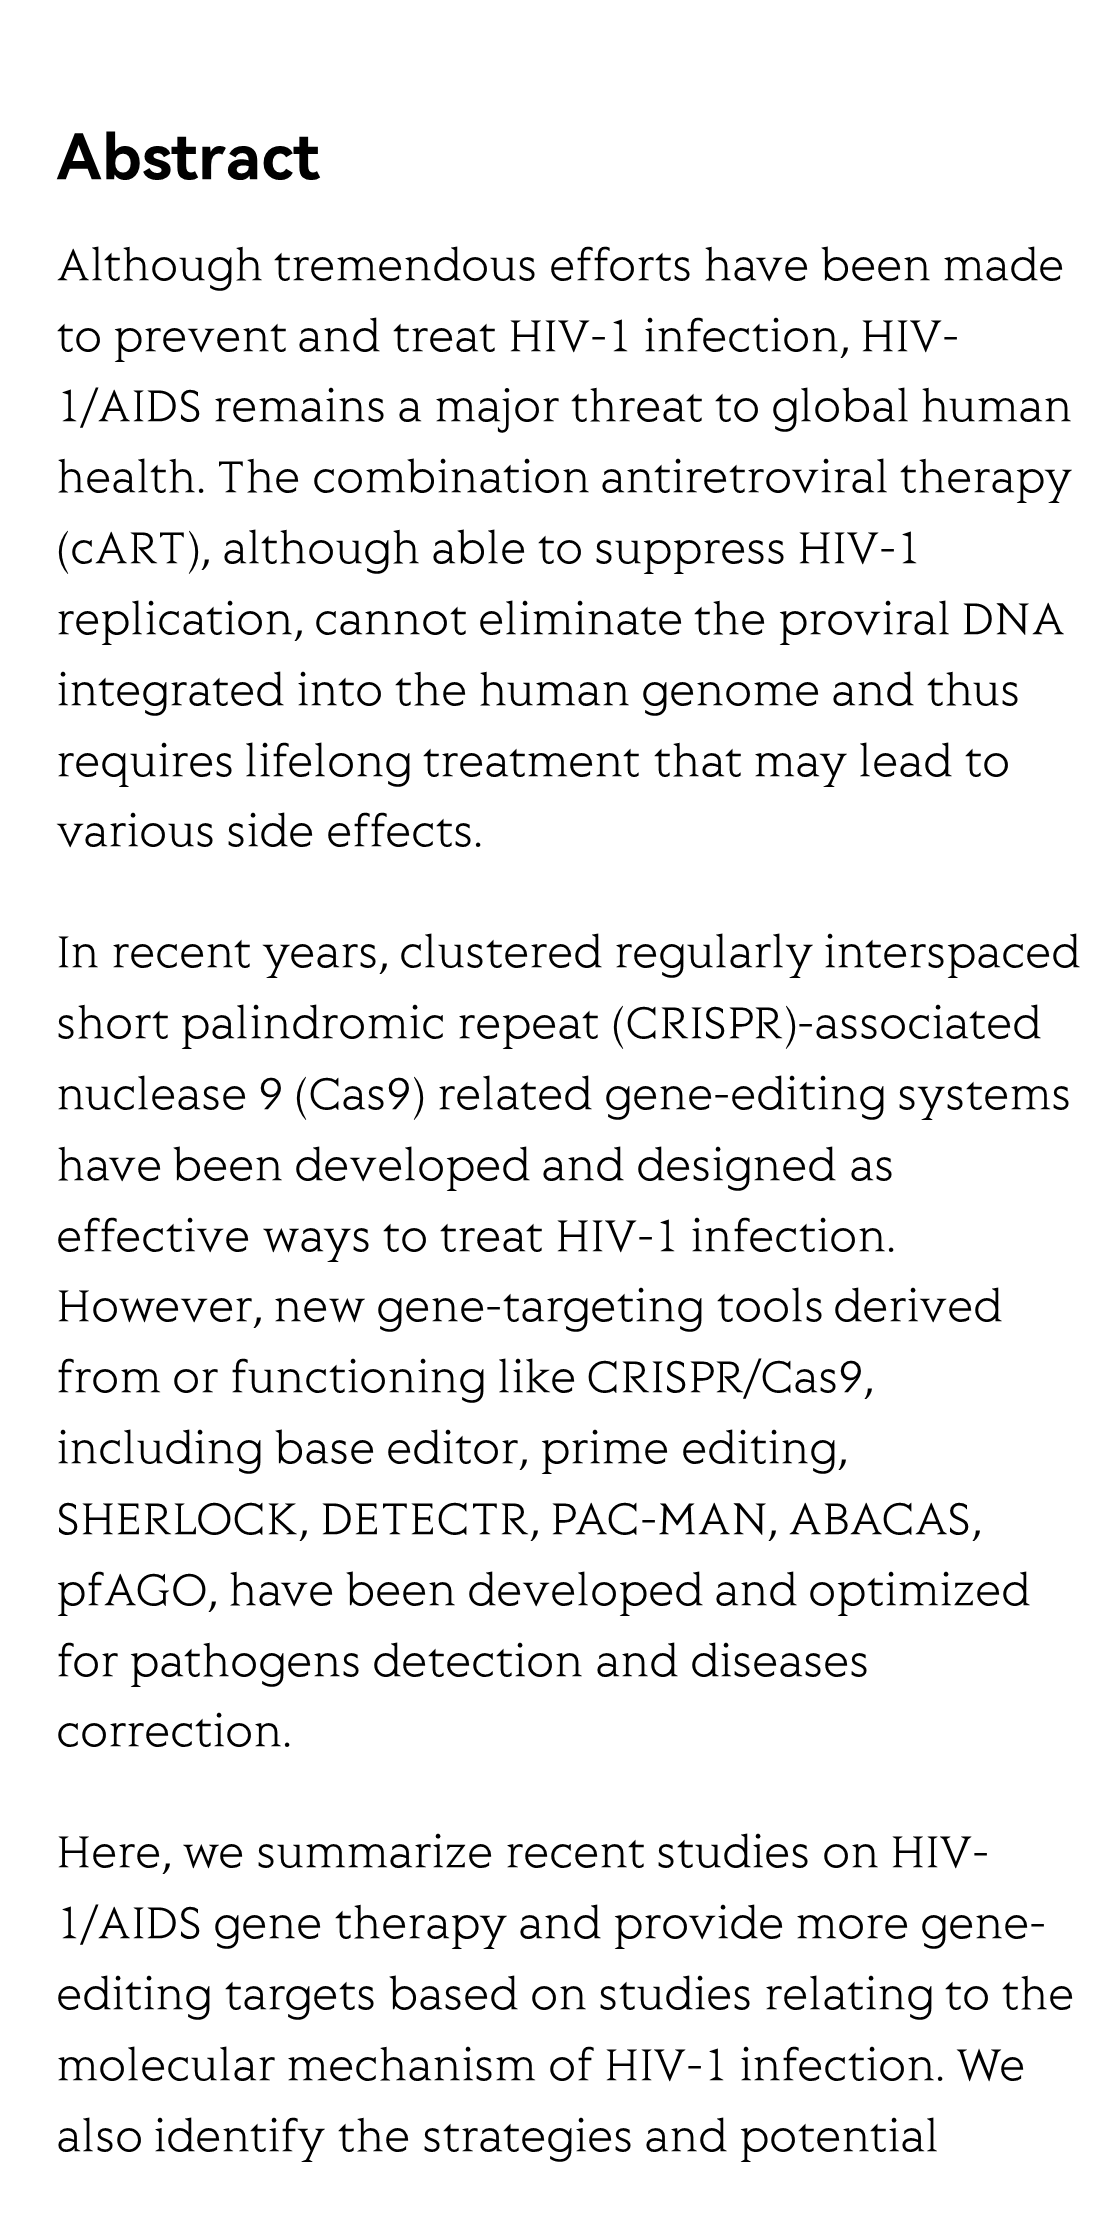 Updates on CRISPR-based gene editing in HIV-1/AIDS therapy_2